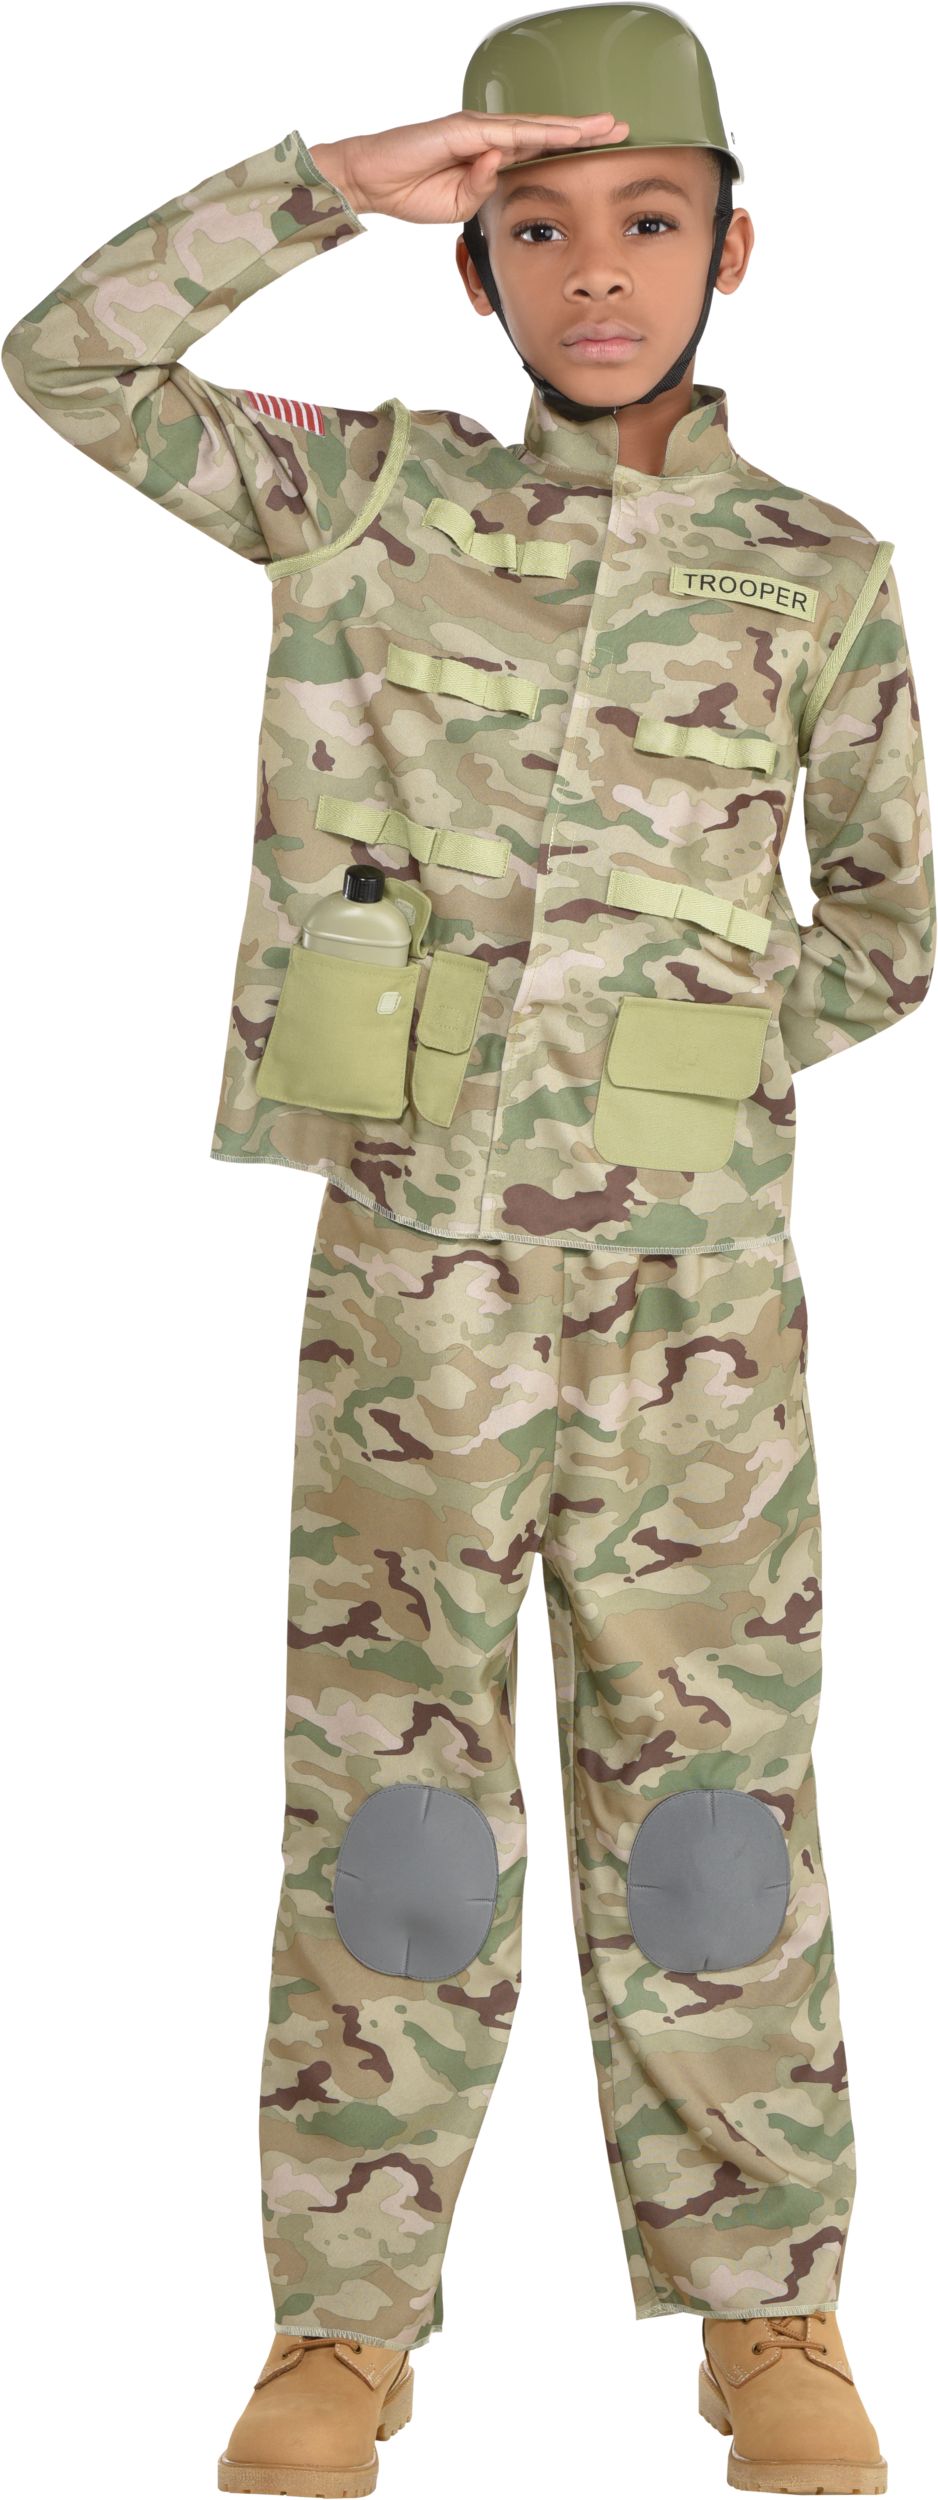 Kids' Combat Soldier Army Camouflage Outfit with Jacket/Pants/Canteen  Halloween Costume, Assorted Sizes